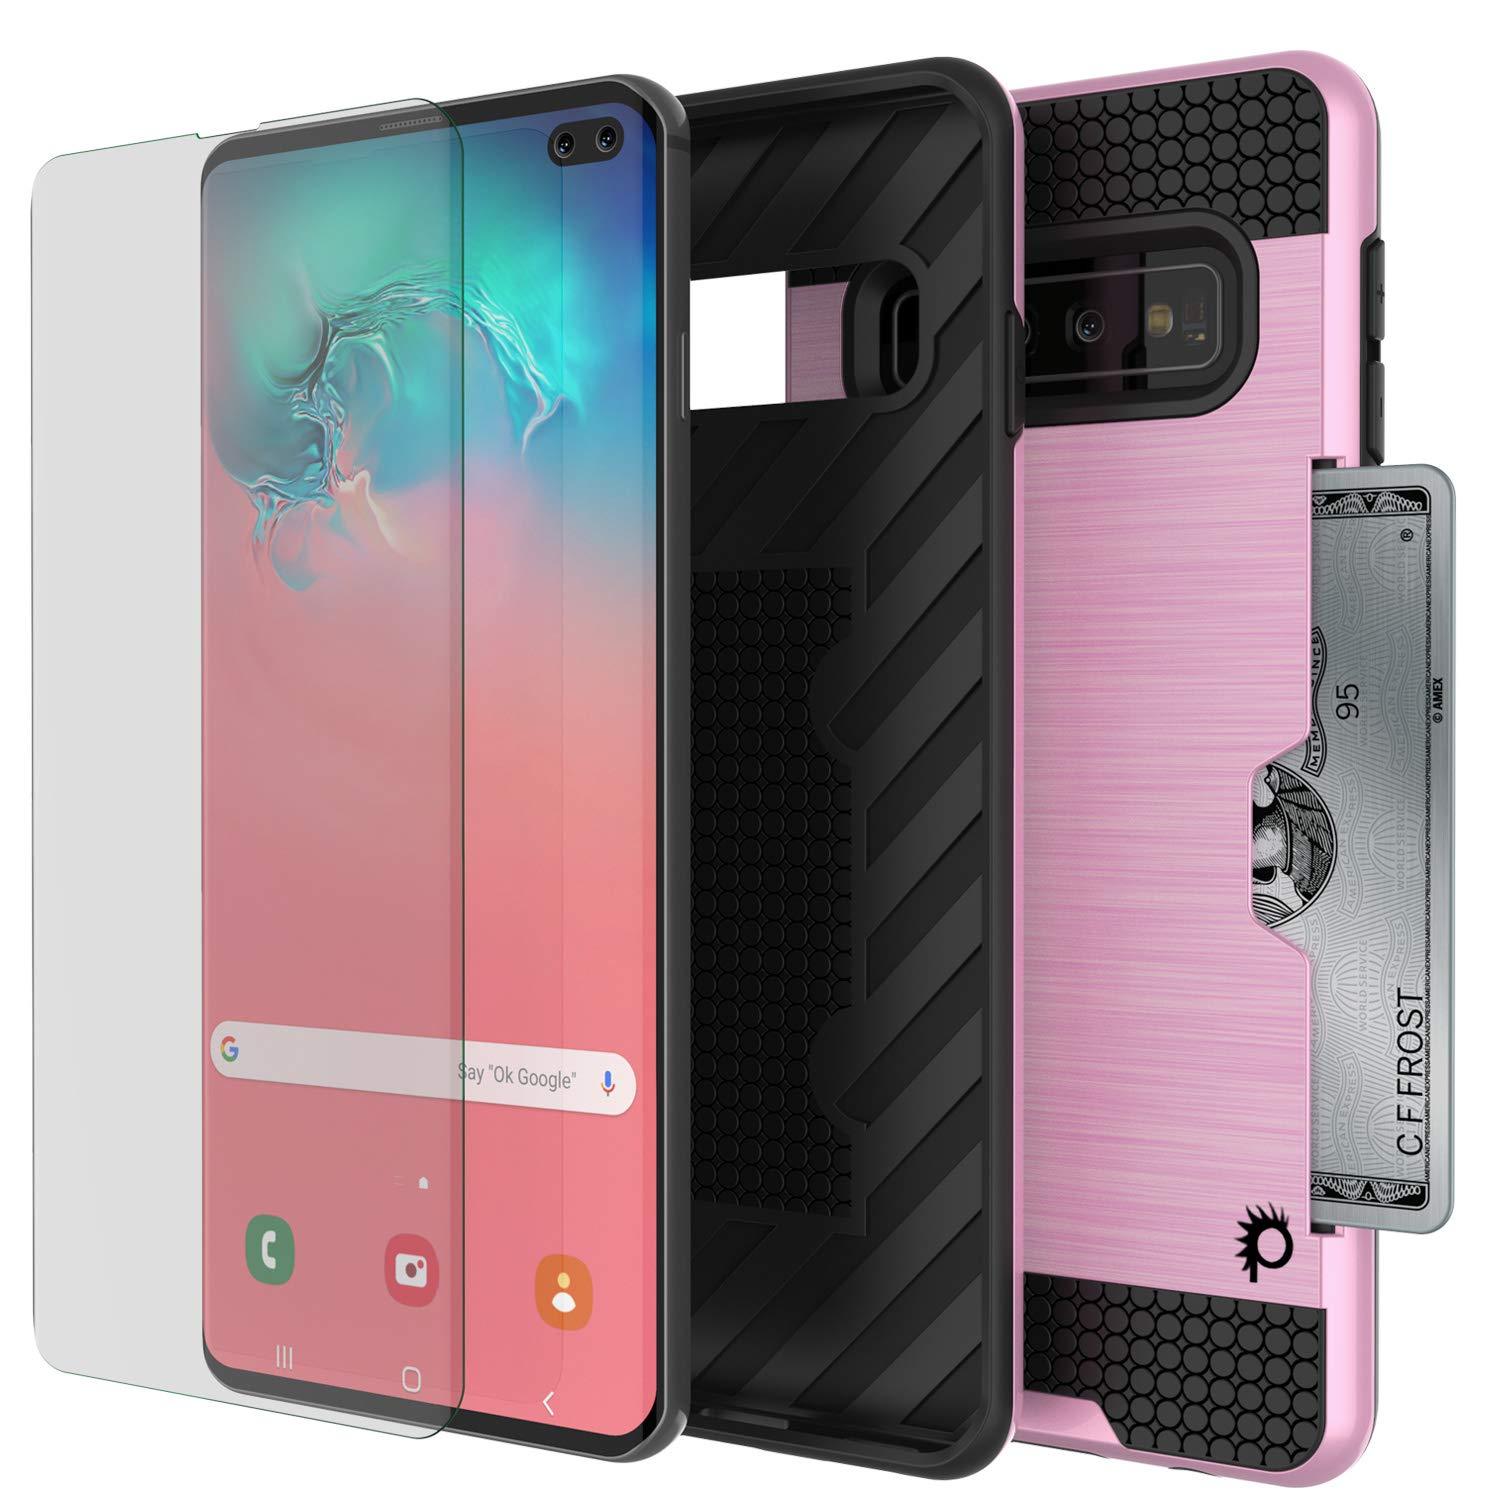 Galaxy S10+ Plus  Case, PUNKcase [SLOT Series] [Slim Fit] Dual-Layer Armor Cover w/Integrated Anti-Shock System, Credit Card Slot [Pink]